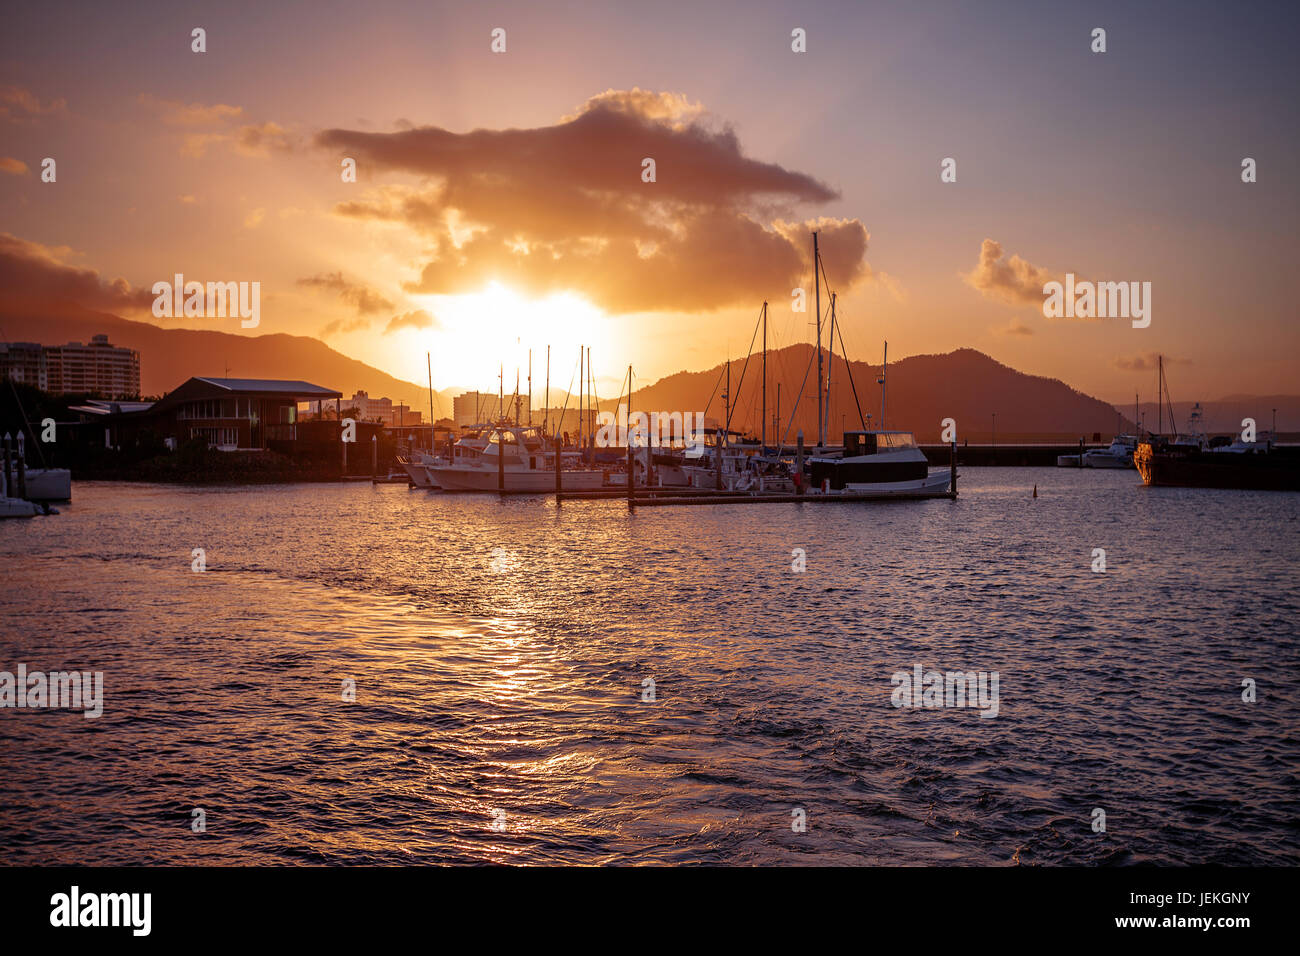 The Pier at sunset, Cairns, Queensland, Australia Stock Photo